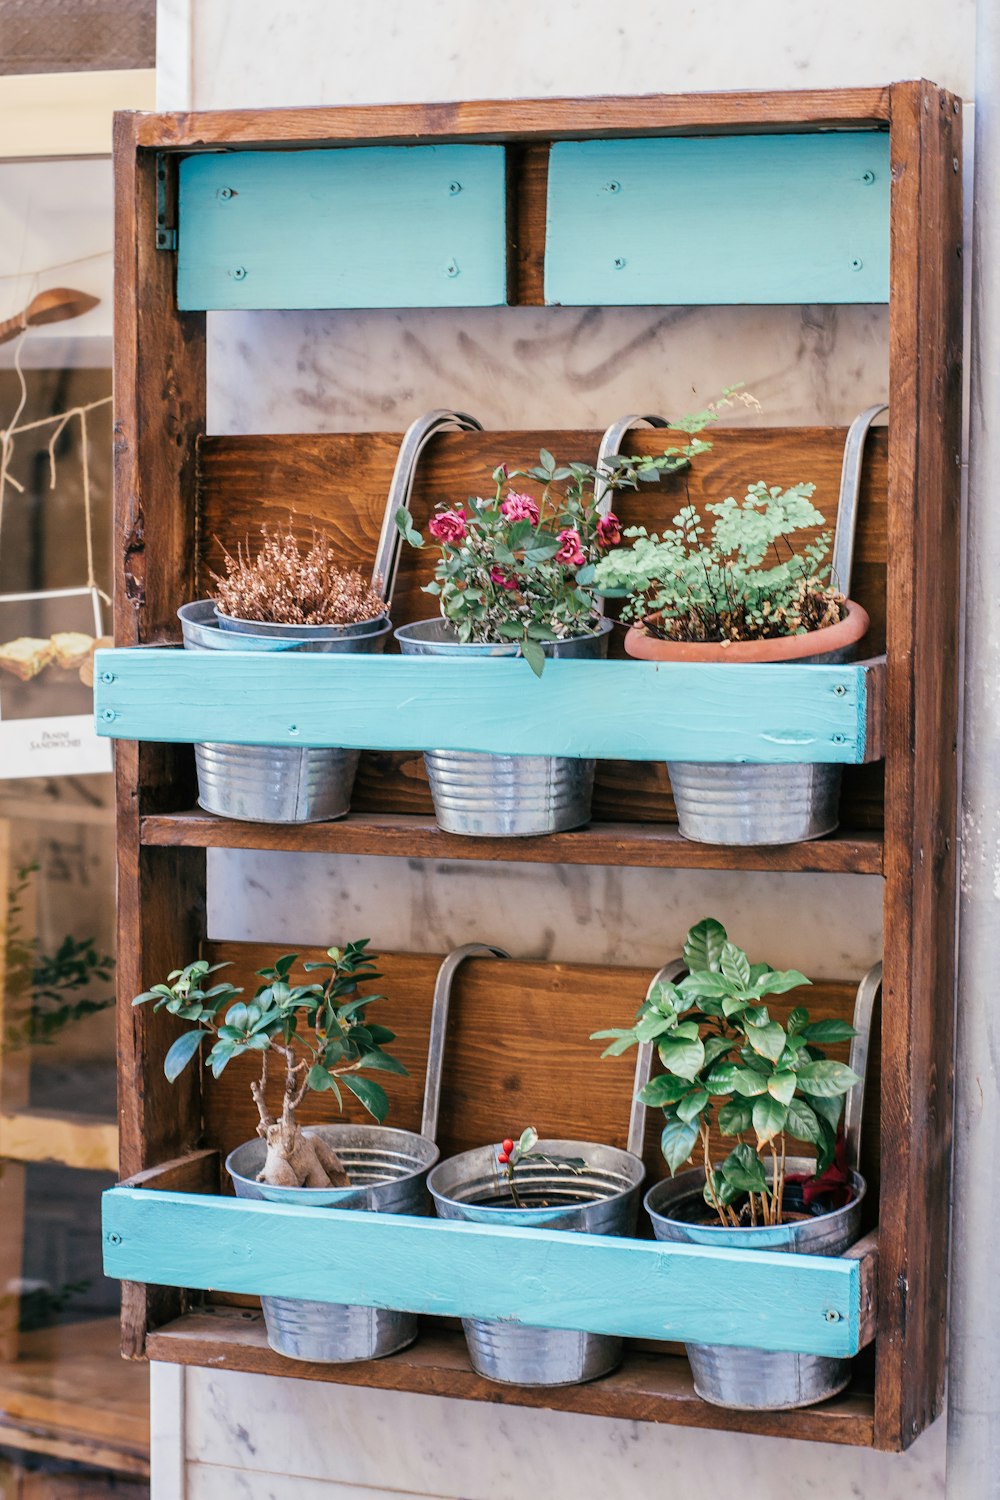 a shelf filled with potted plants on top of a wall